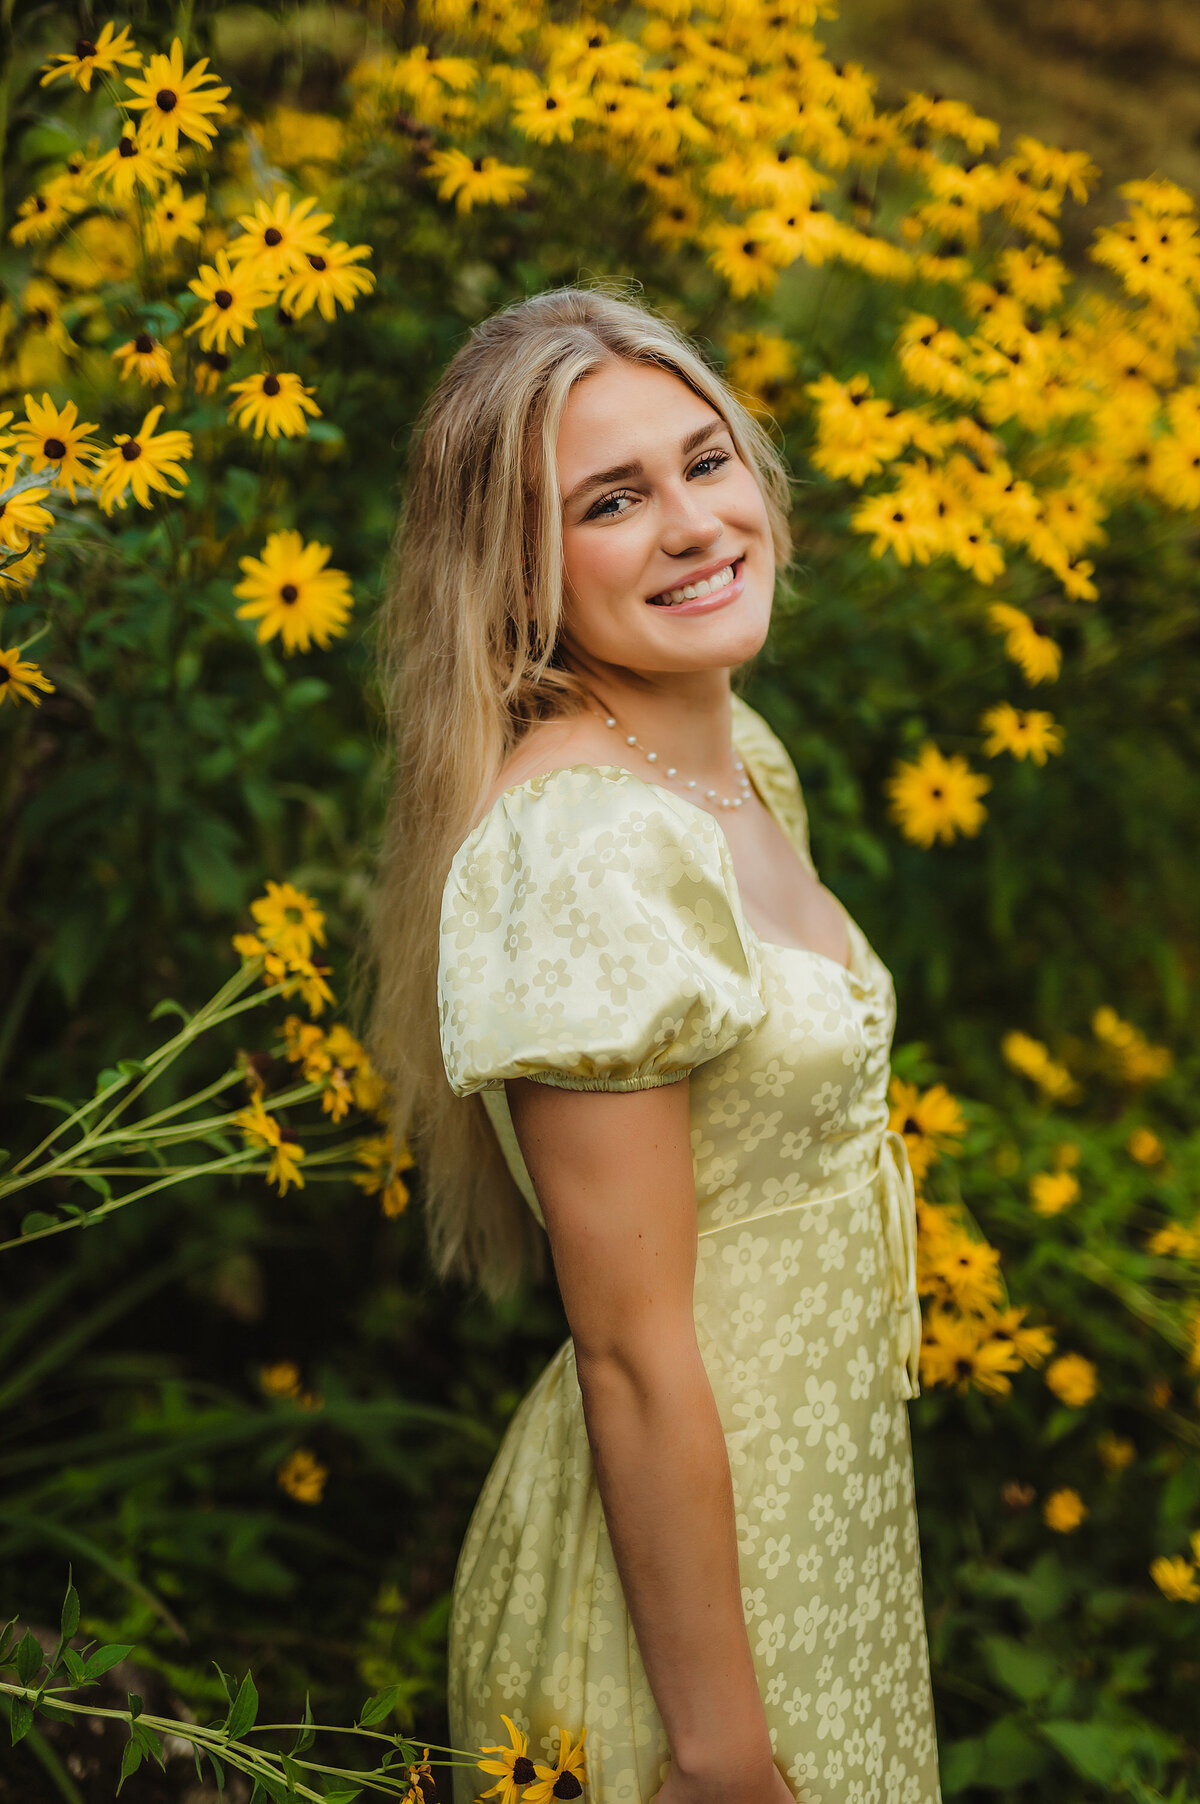 A student from Brookfield Central High School stands in a field of black-eyed susan flowers in Delafield, WI wearing a floral sundress for her senior pictures.